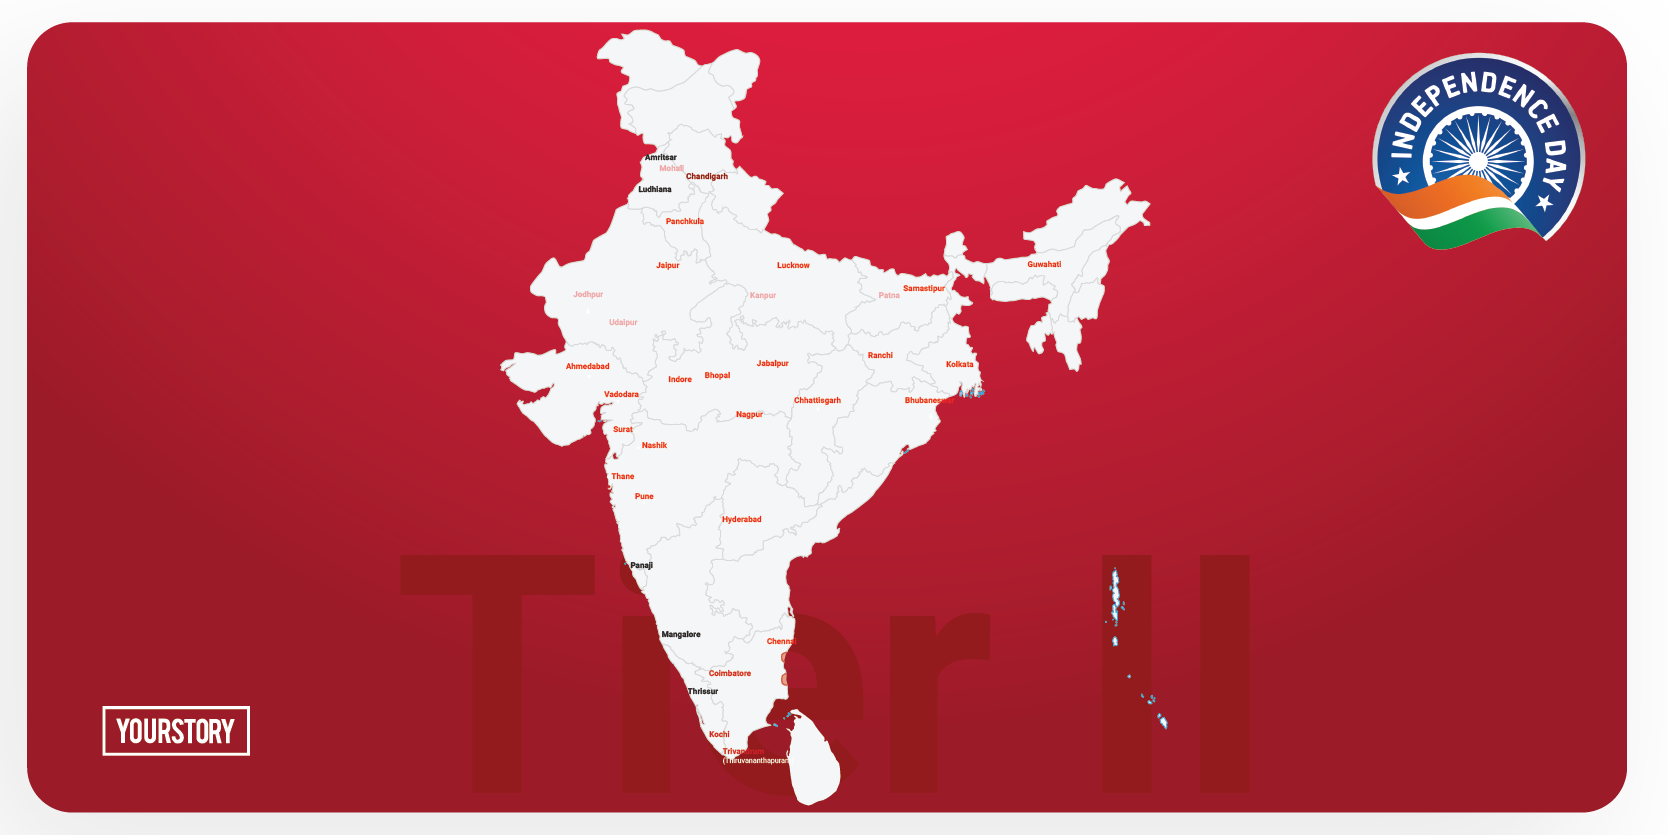 [Startup Bharat] How India’s Tier II cities are emerging as new startup hubs buzzing with funding activity